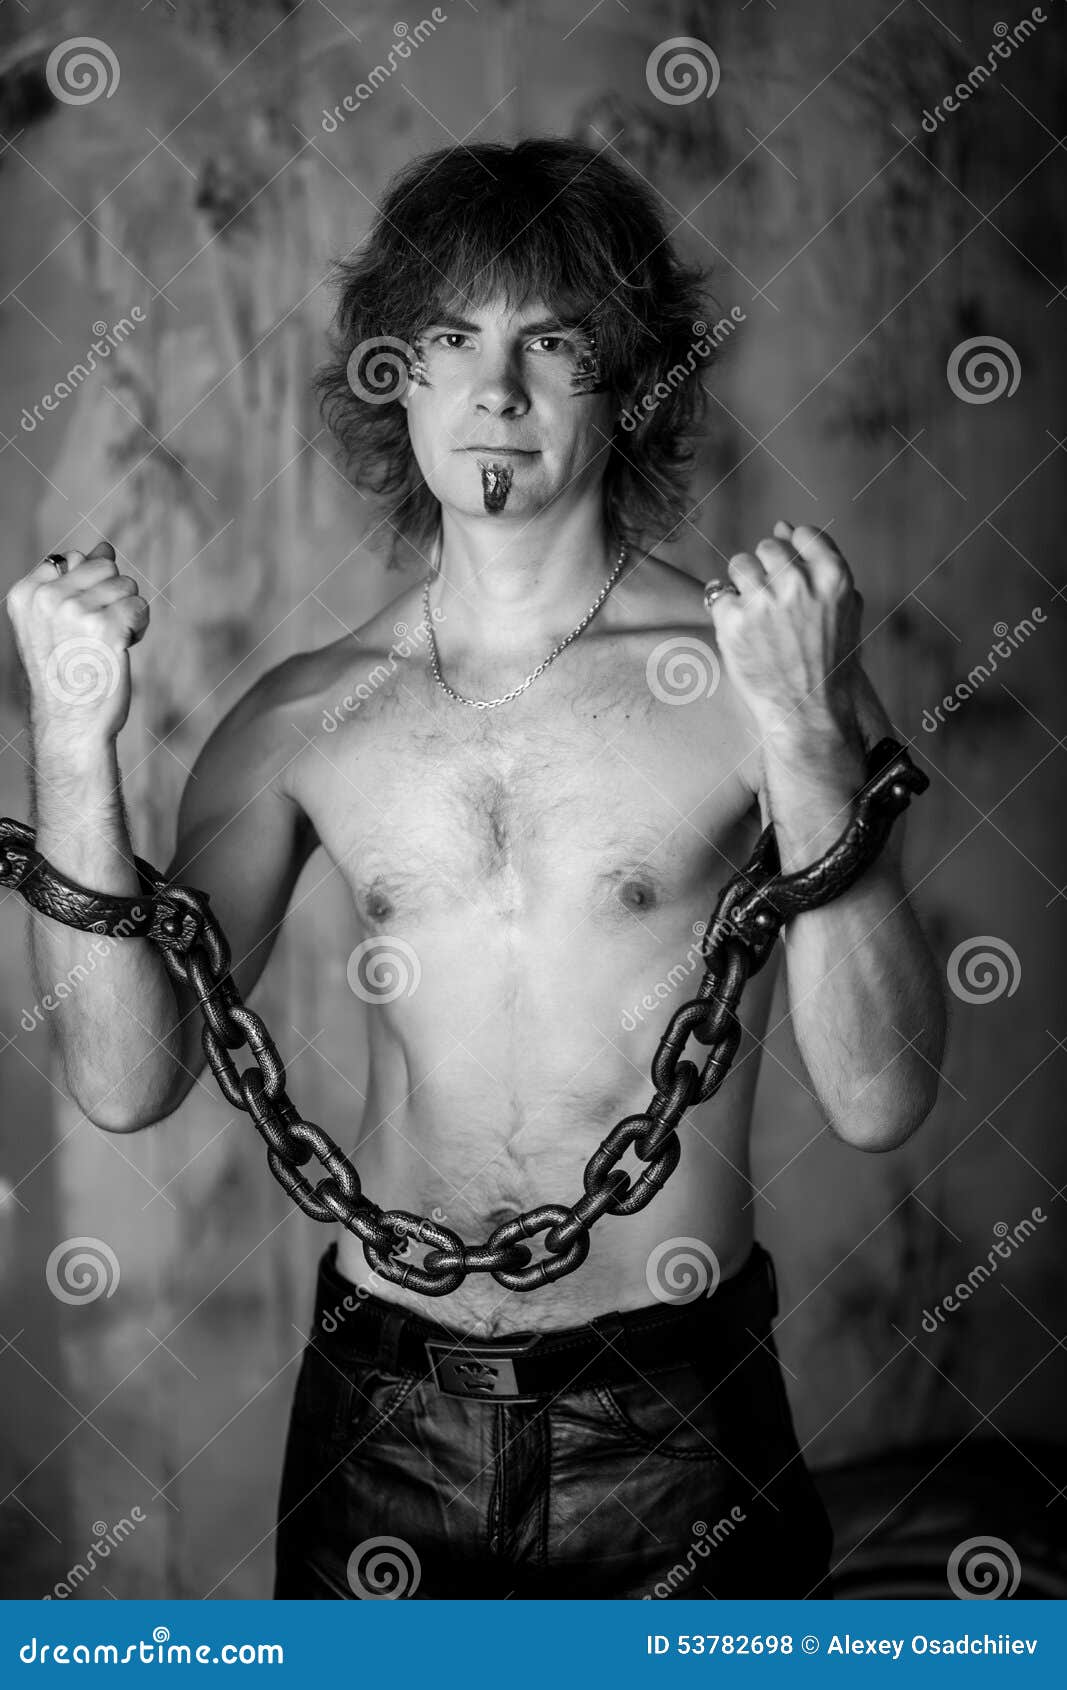 Hands Chained Stock Photo - Image: 53782698